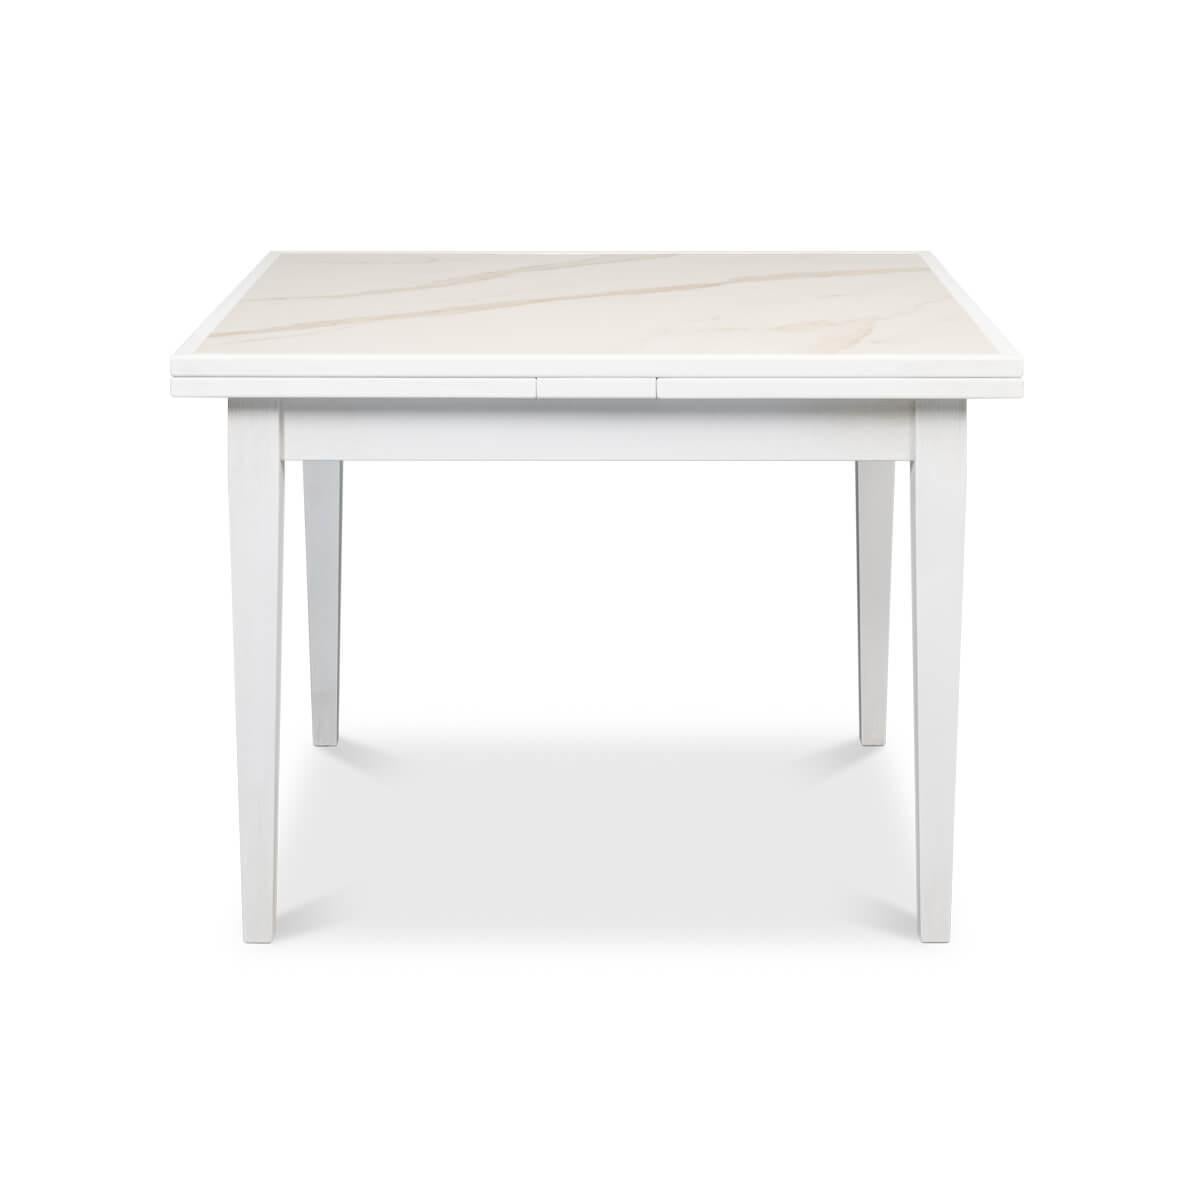 An Italian-style draw leaf table converts from a square 41